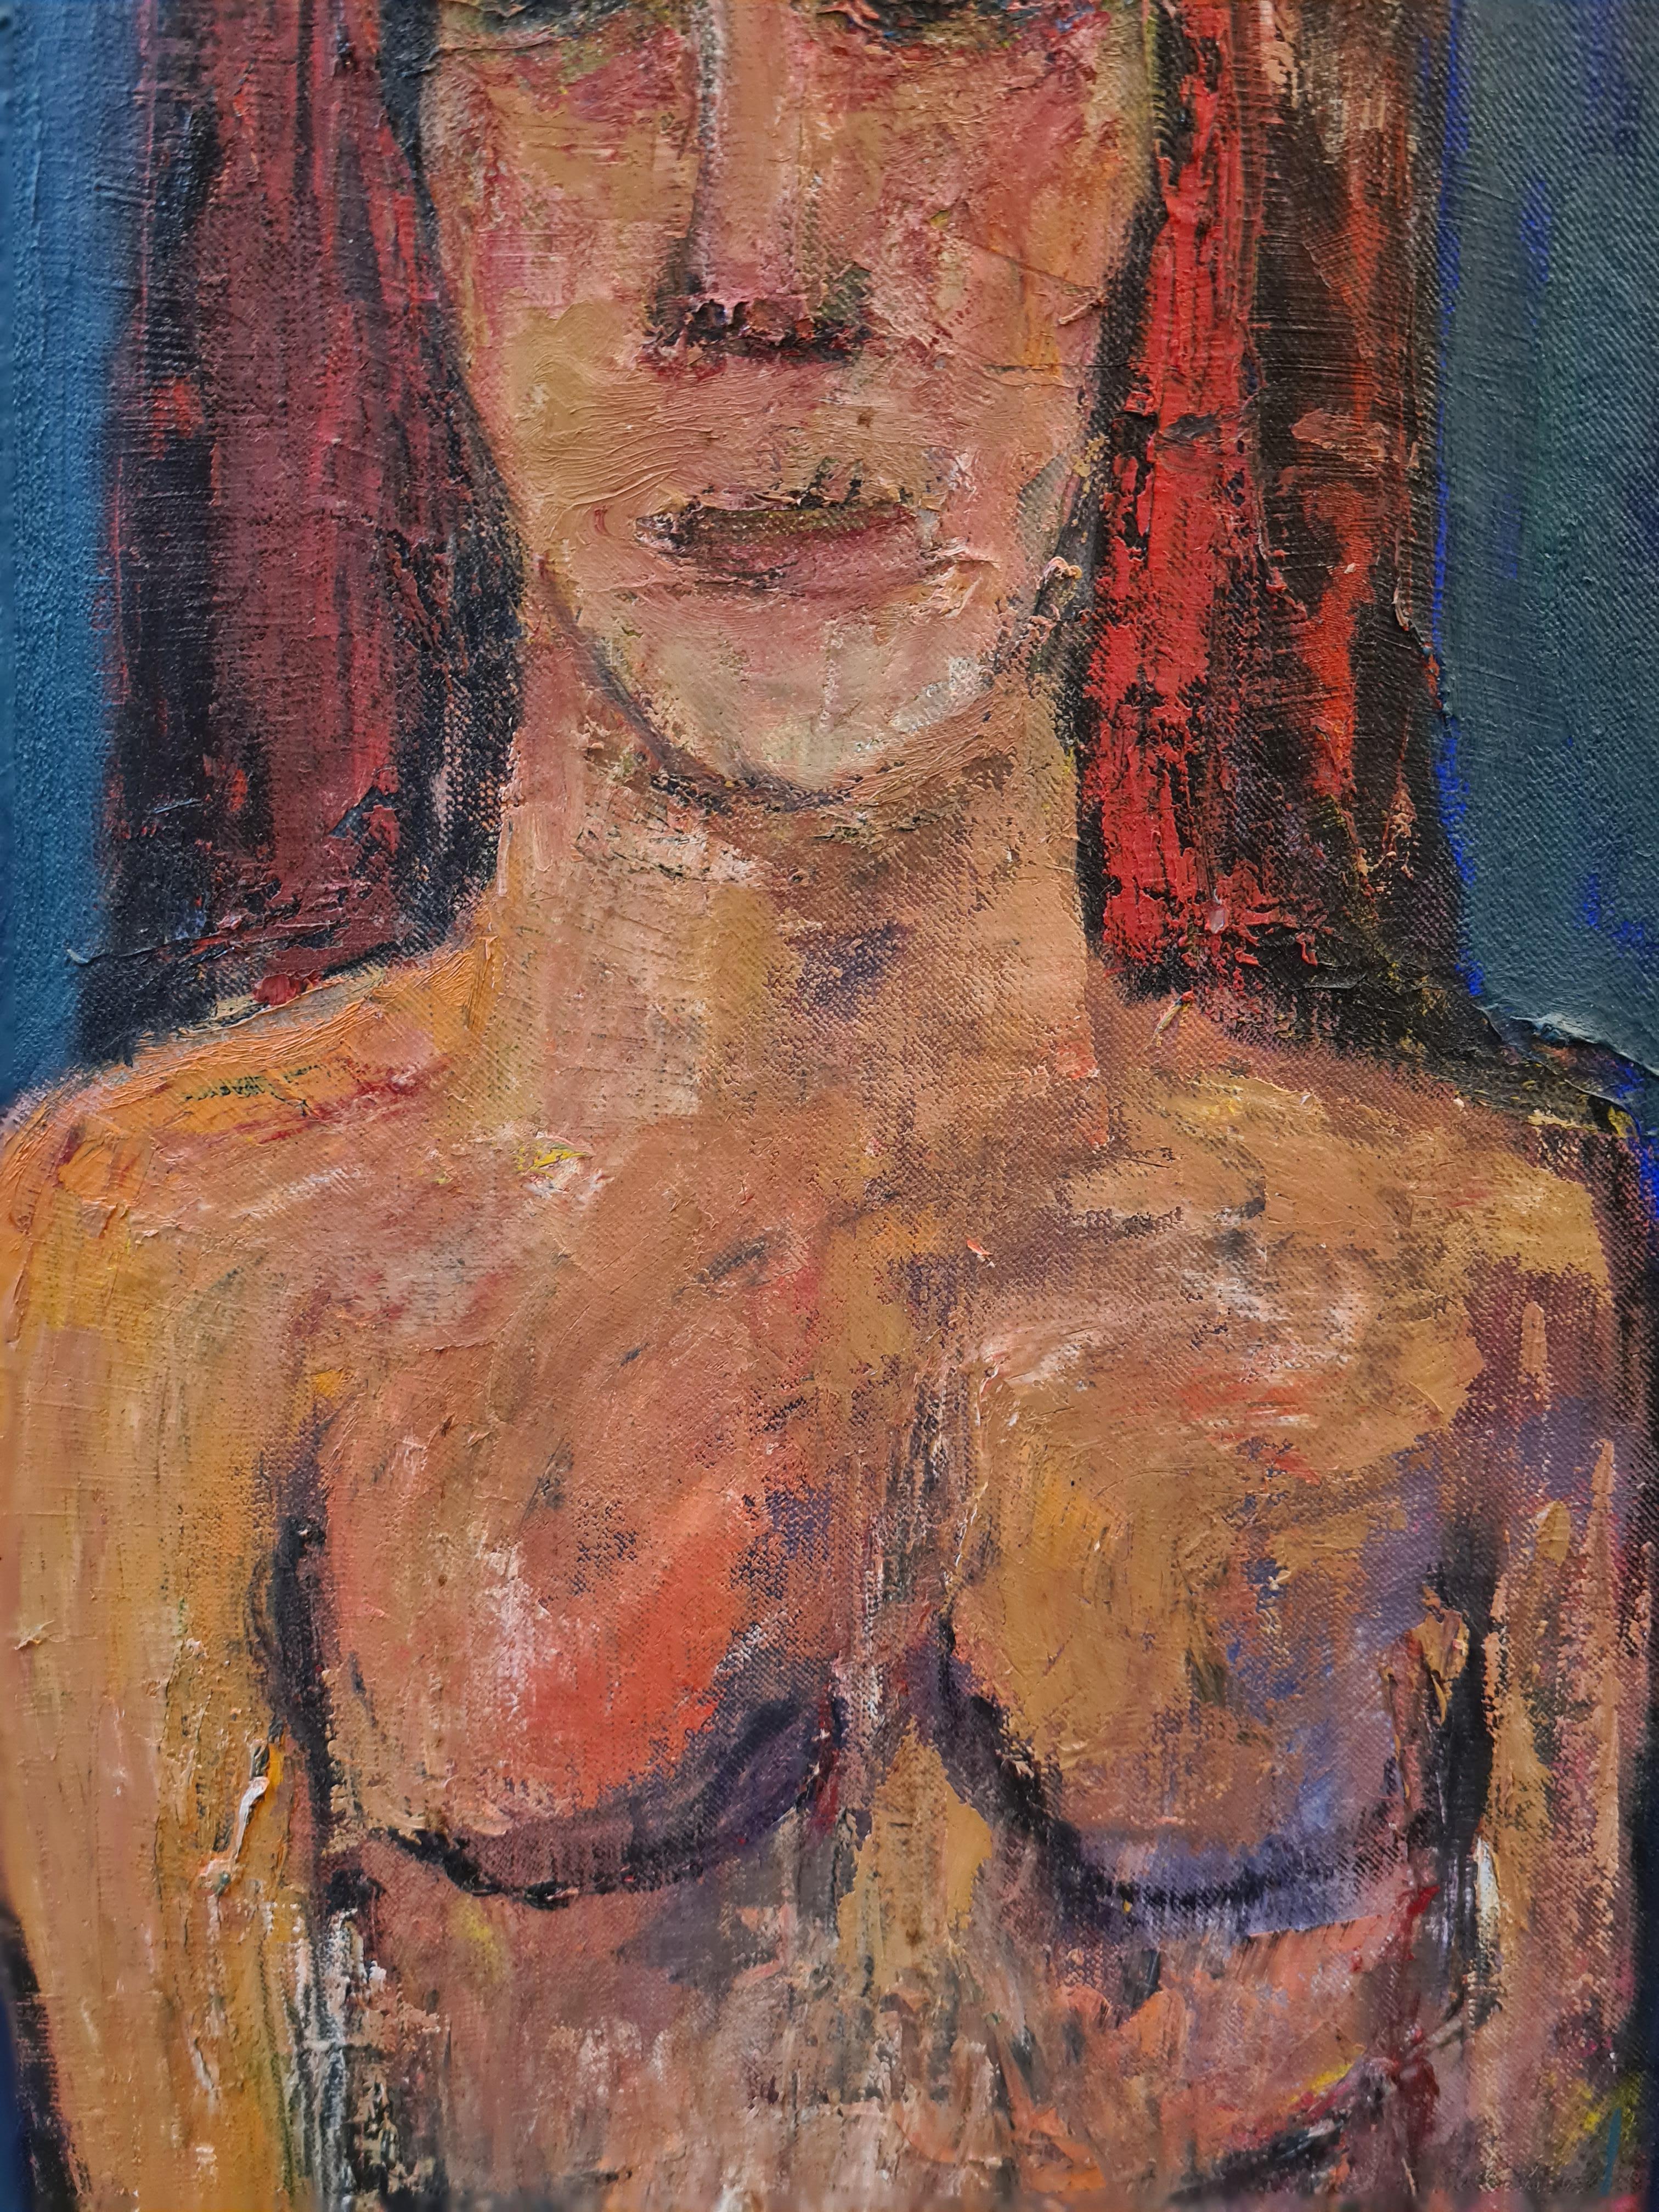 Expressionist Female Nude Portrait, 'The Green Curtain' Oil on Canvas. For Sale 1